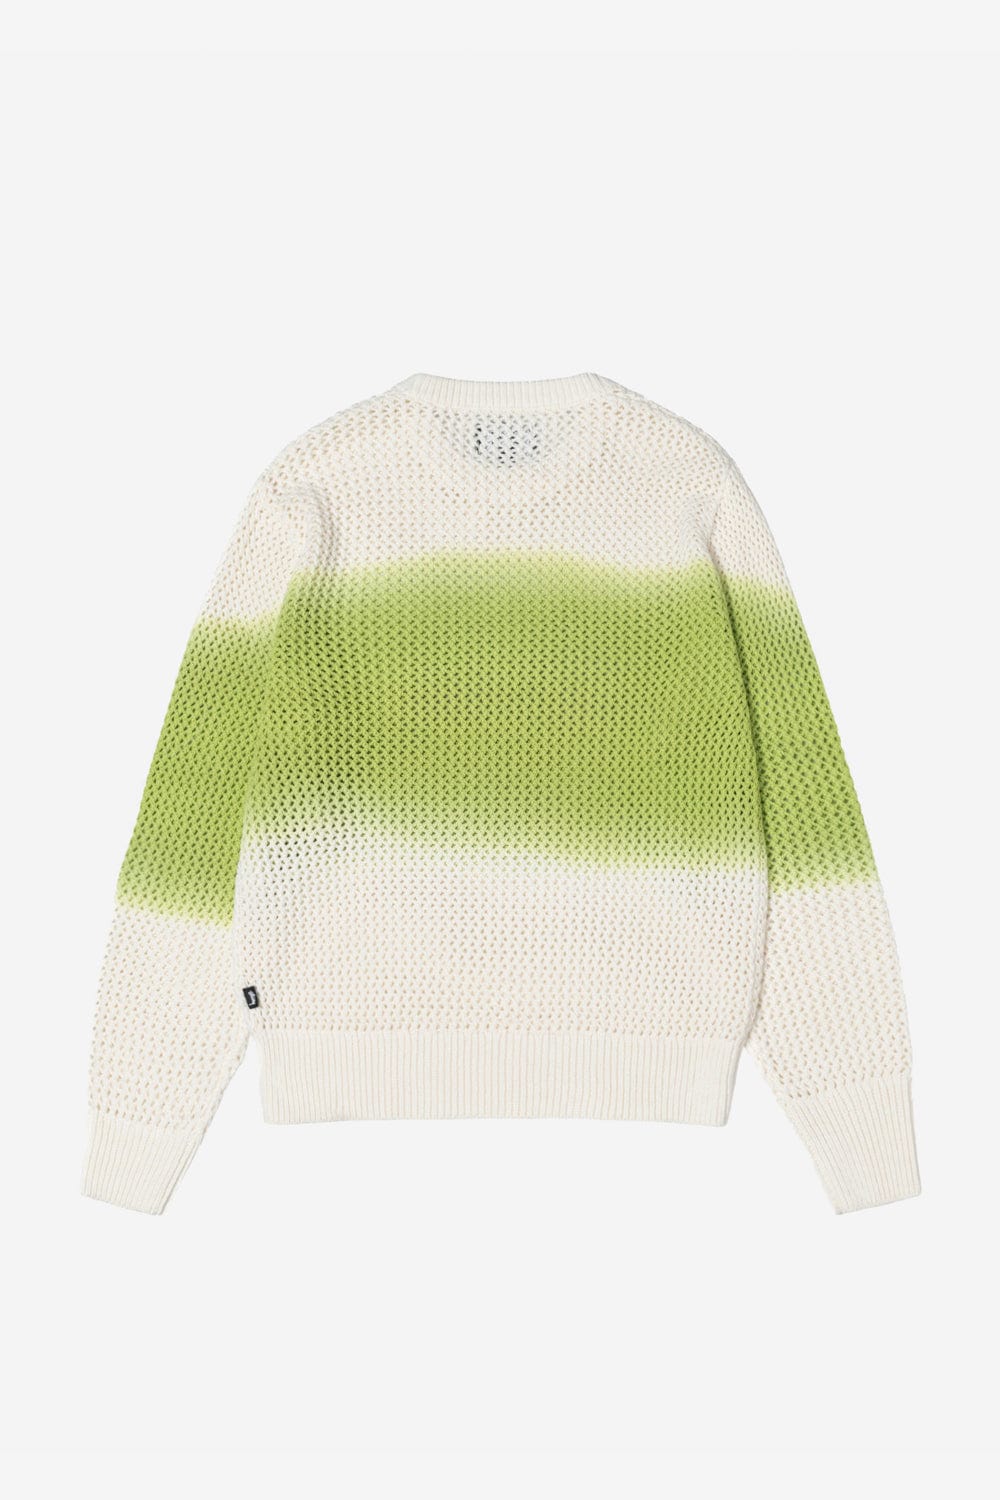 Stussy Pigment Dyed Loose Gauge Sweater (Bright Green) - Commonwealth